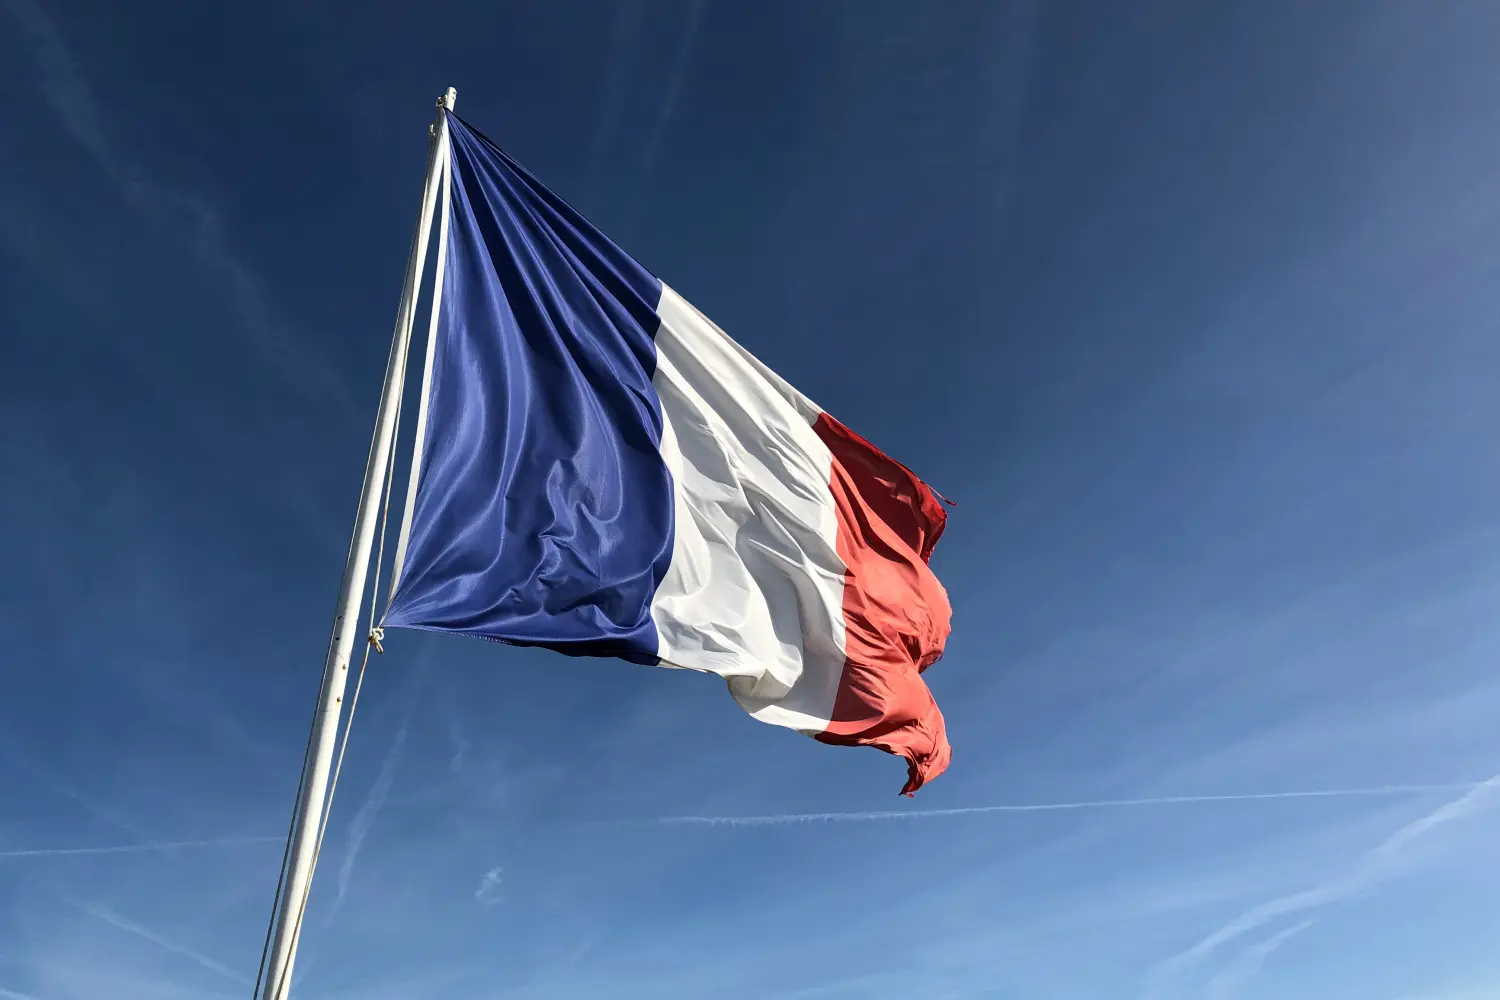 French ferries - French flag waving